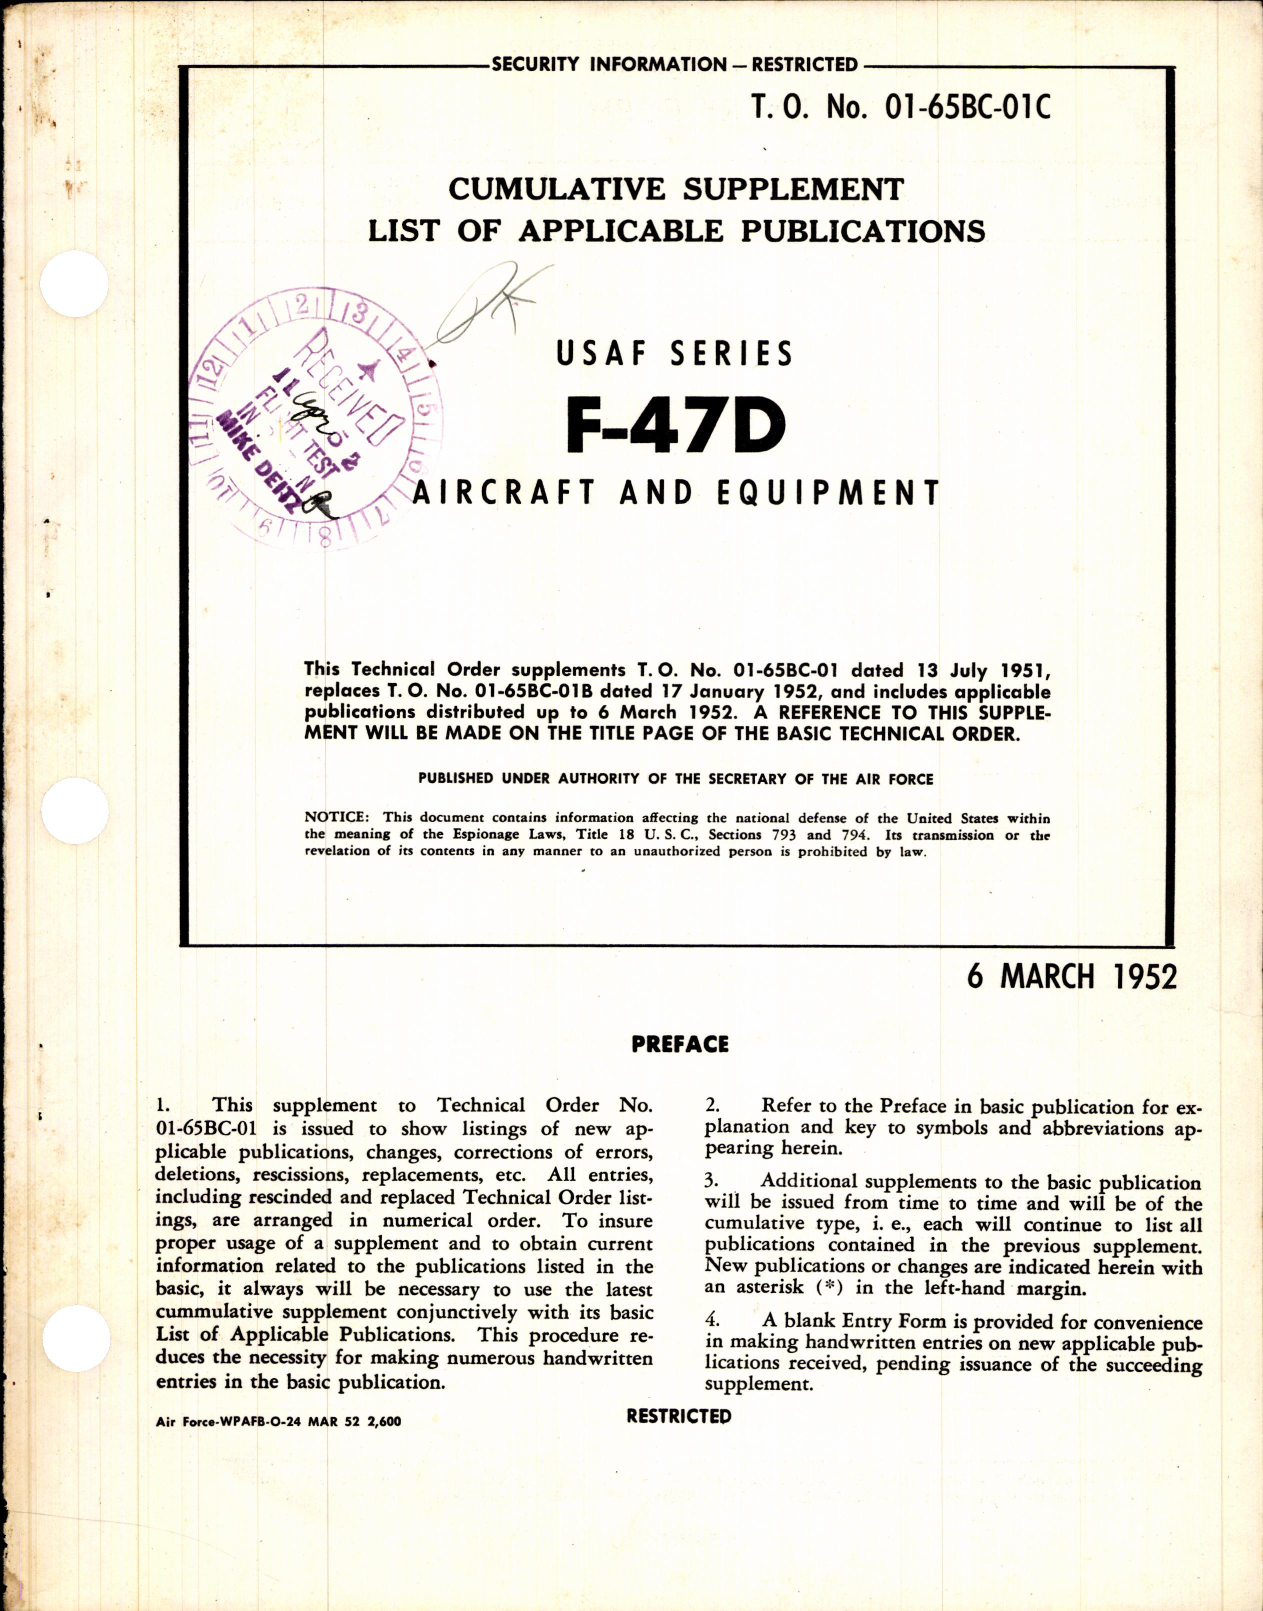 Sample page 1 from AirCorps Library document: Cumulative Supplement List of Applicable Publications for F-47D Aircraft and Equipment